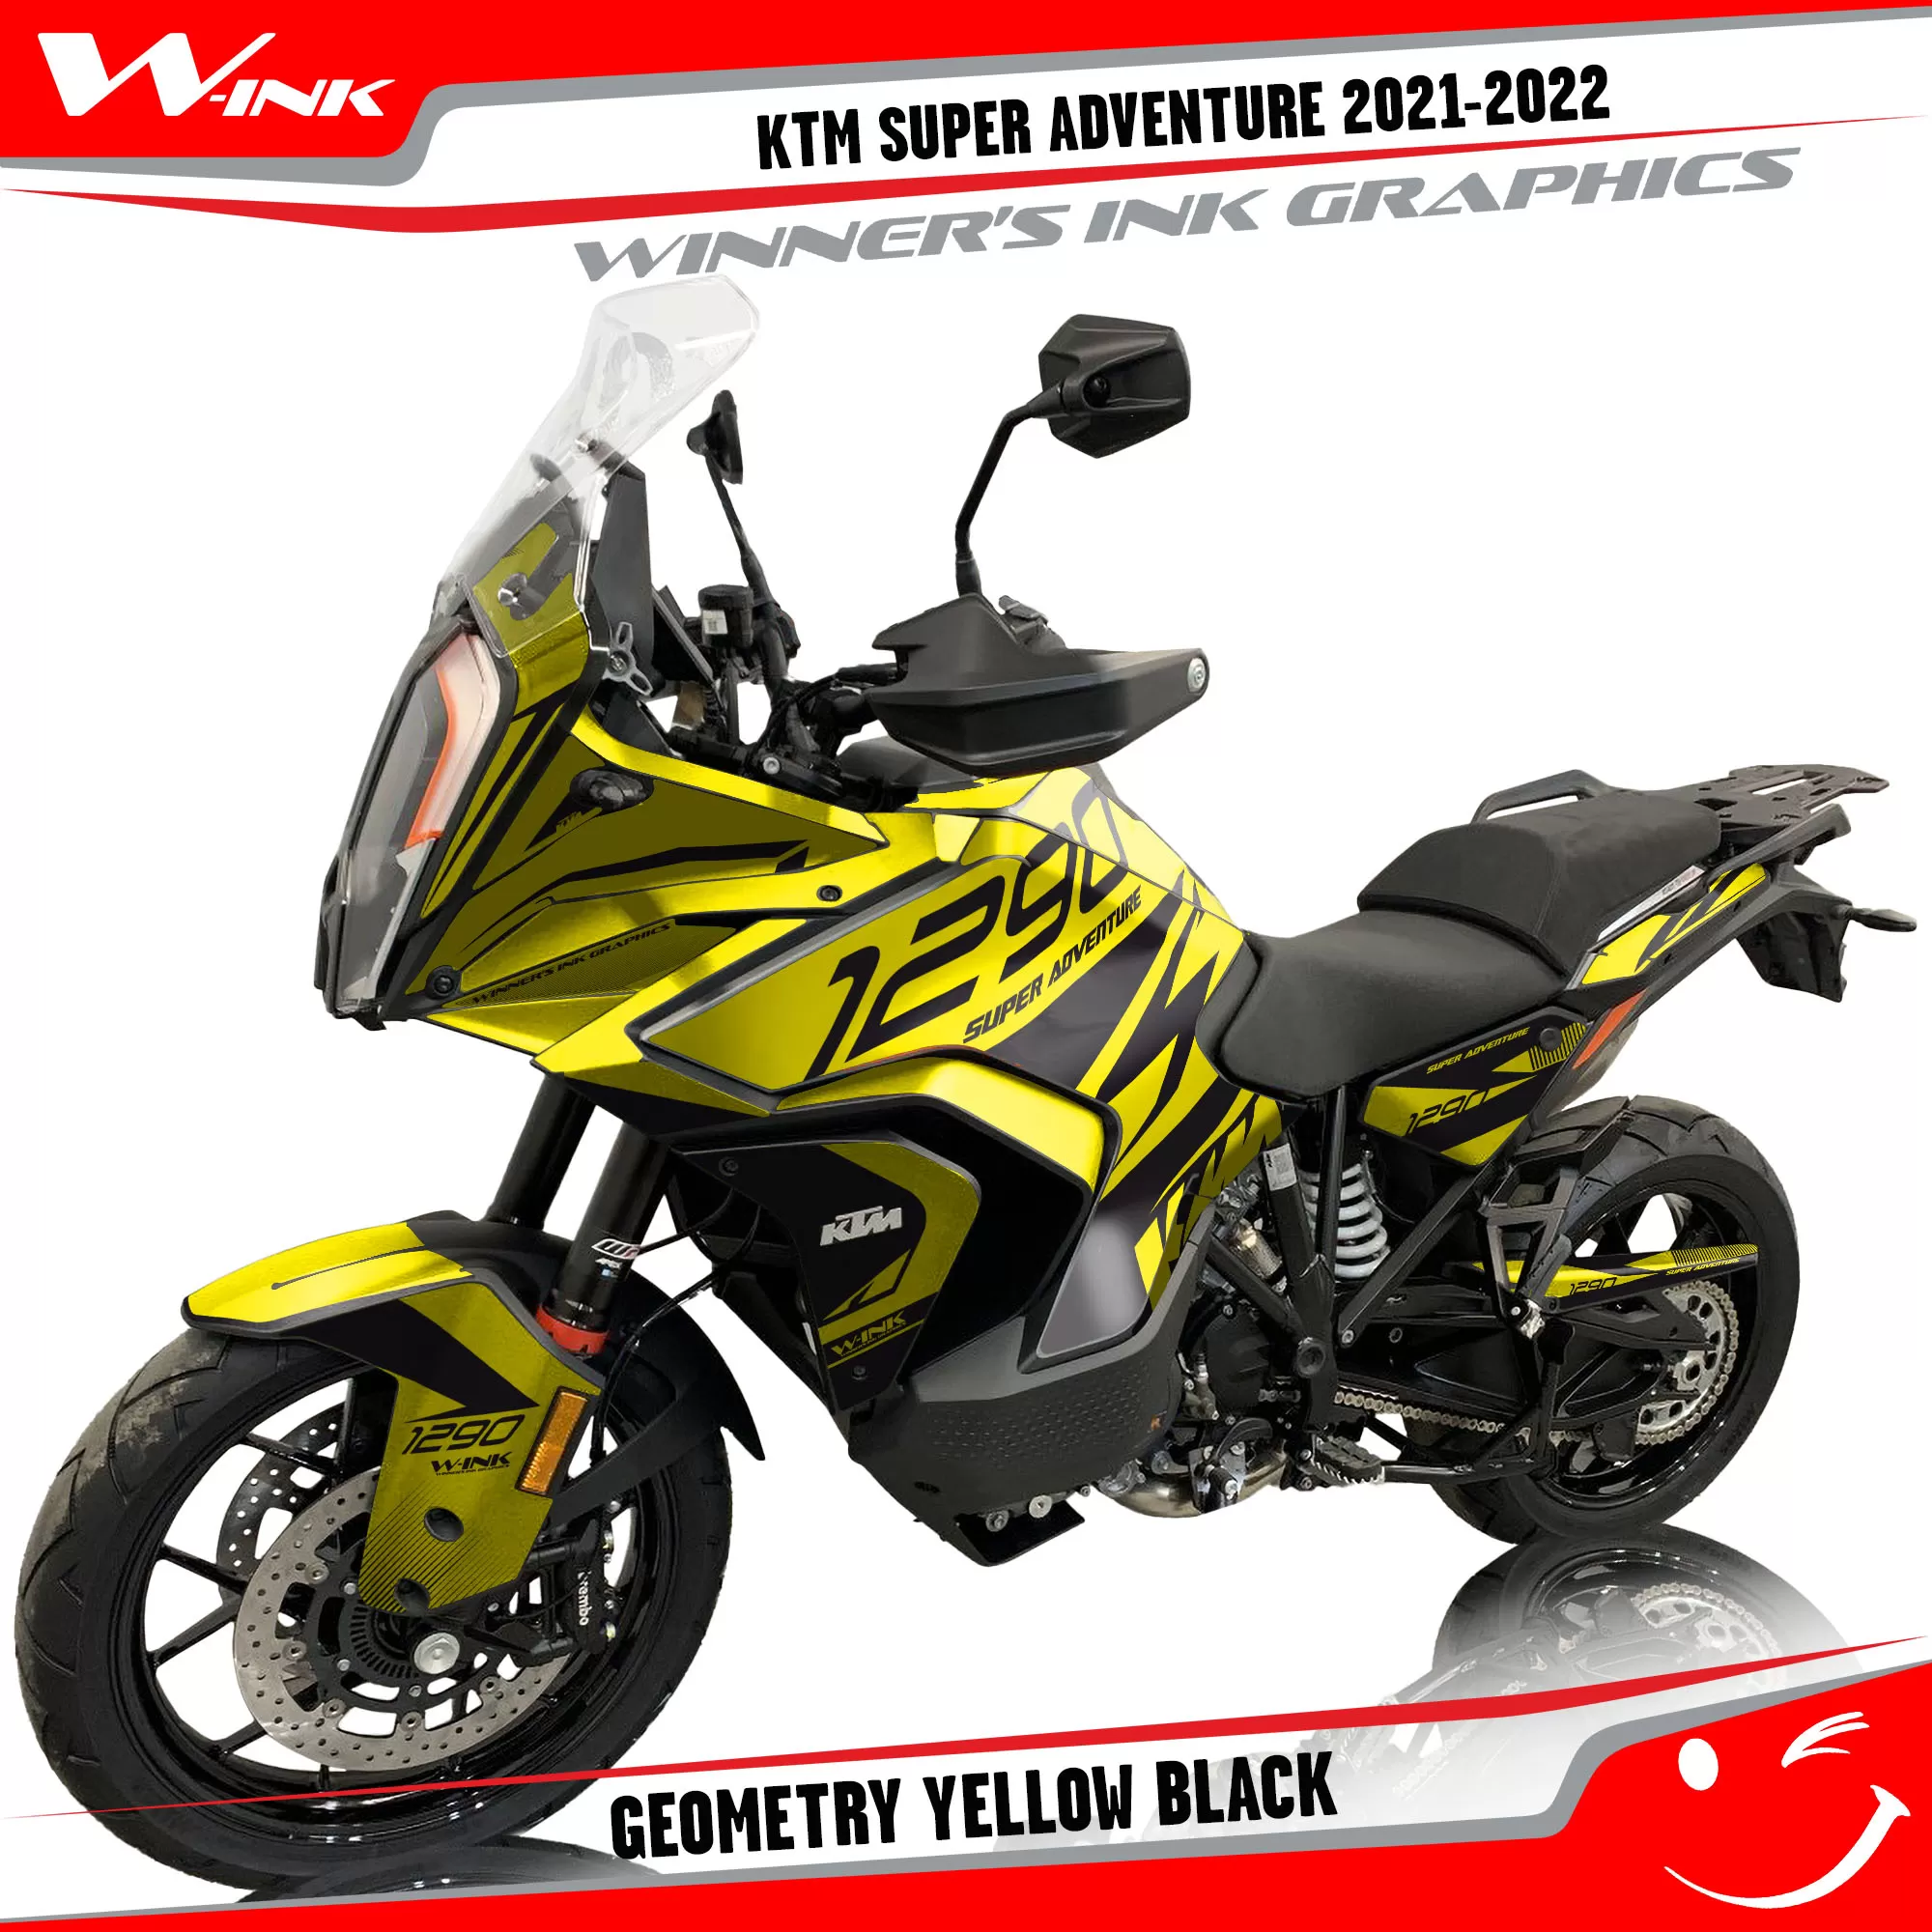 KTM-Super-Adventure-S-2021-2022-graphics-kit-and-decals-with-designs-Geometry-Yellow-Black